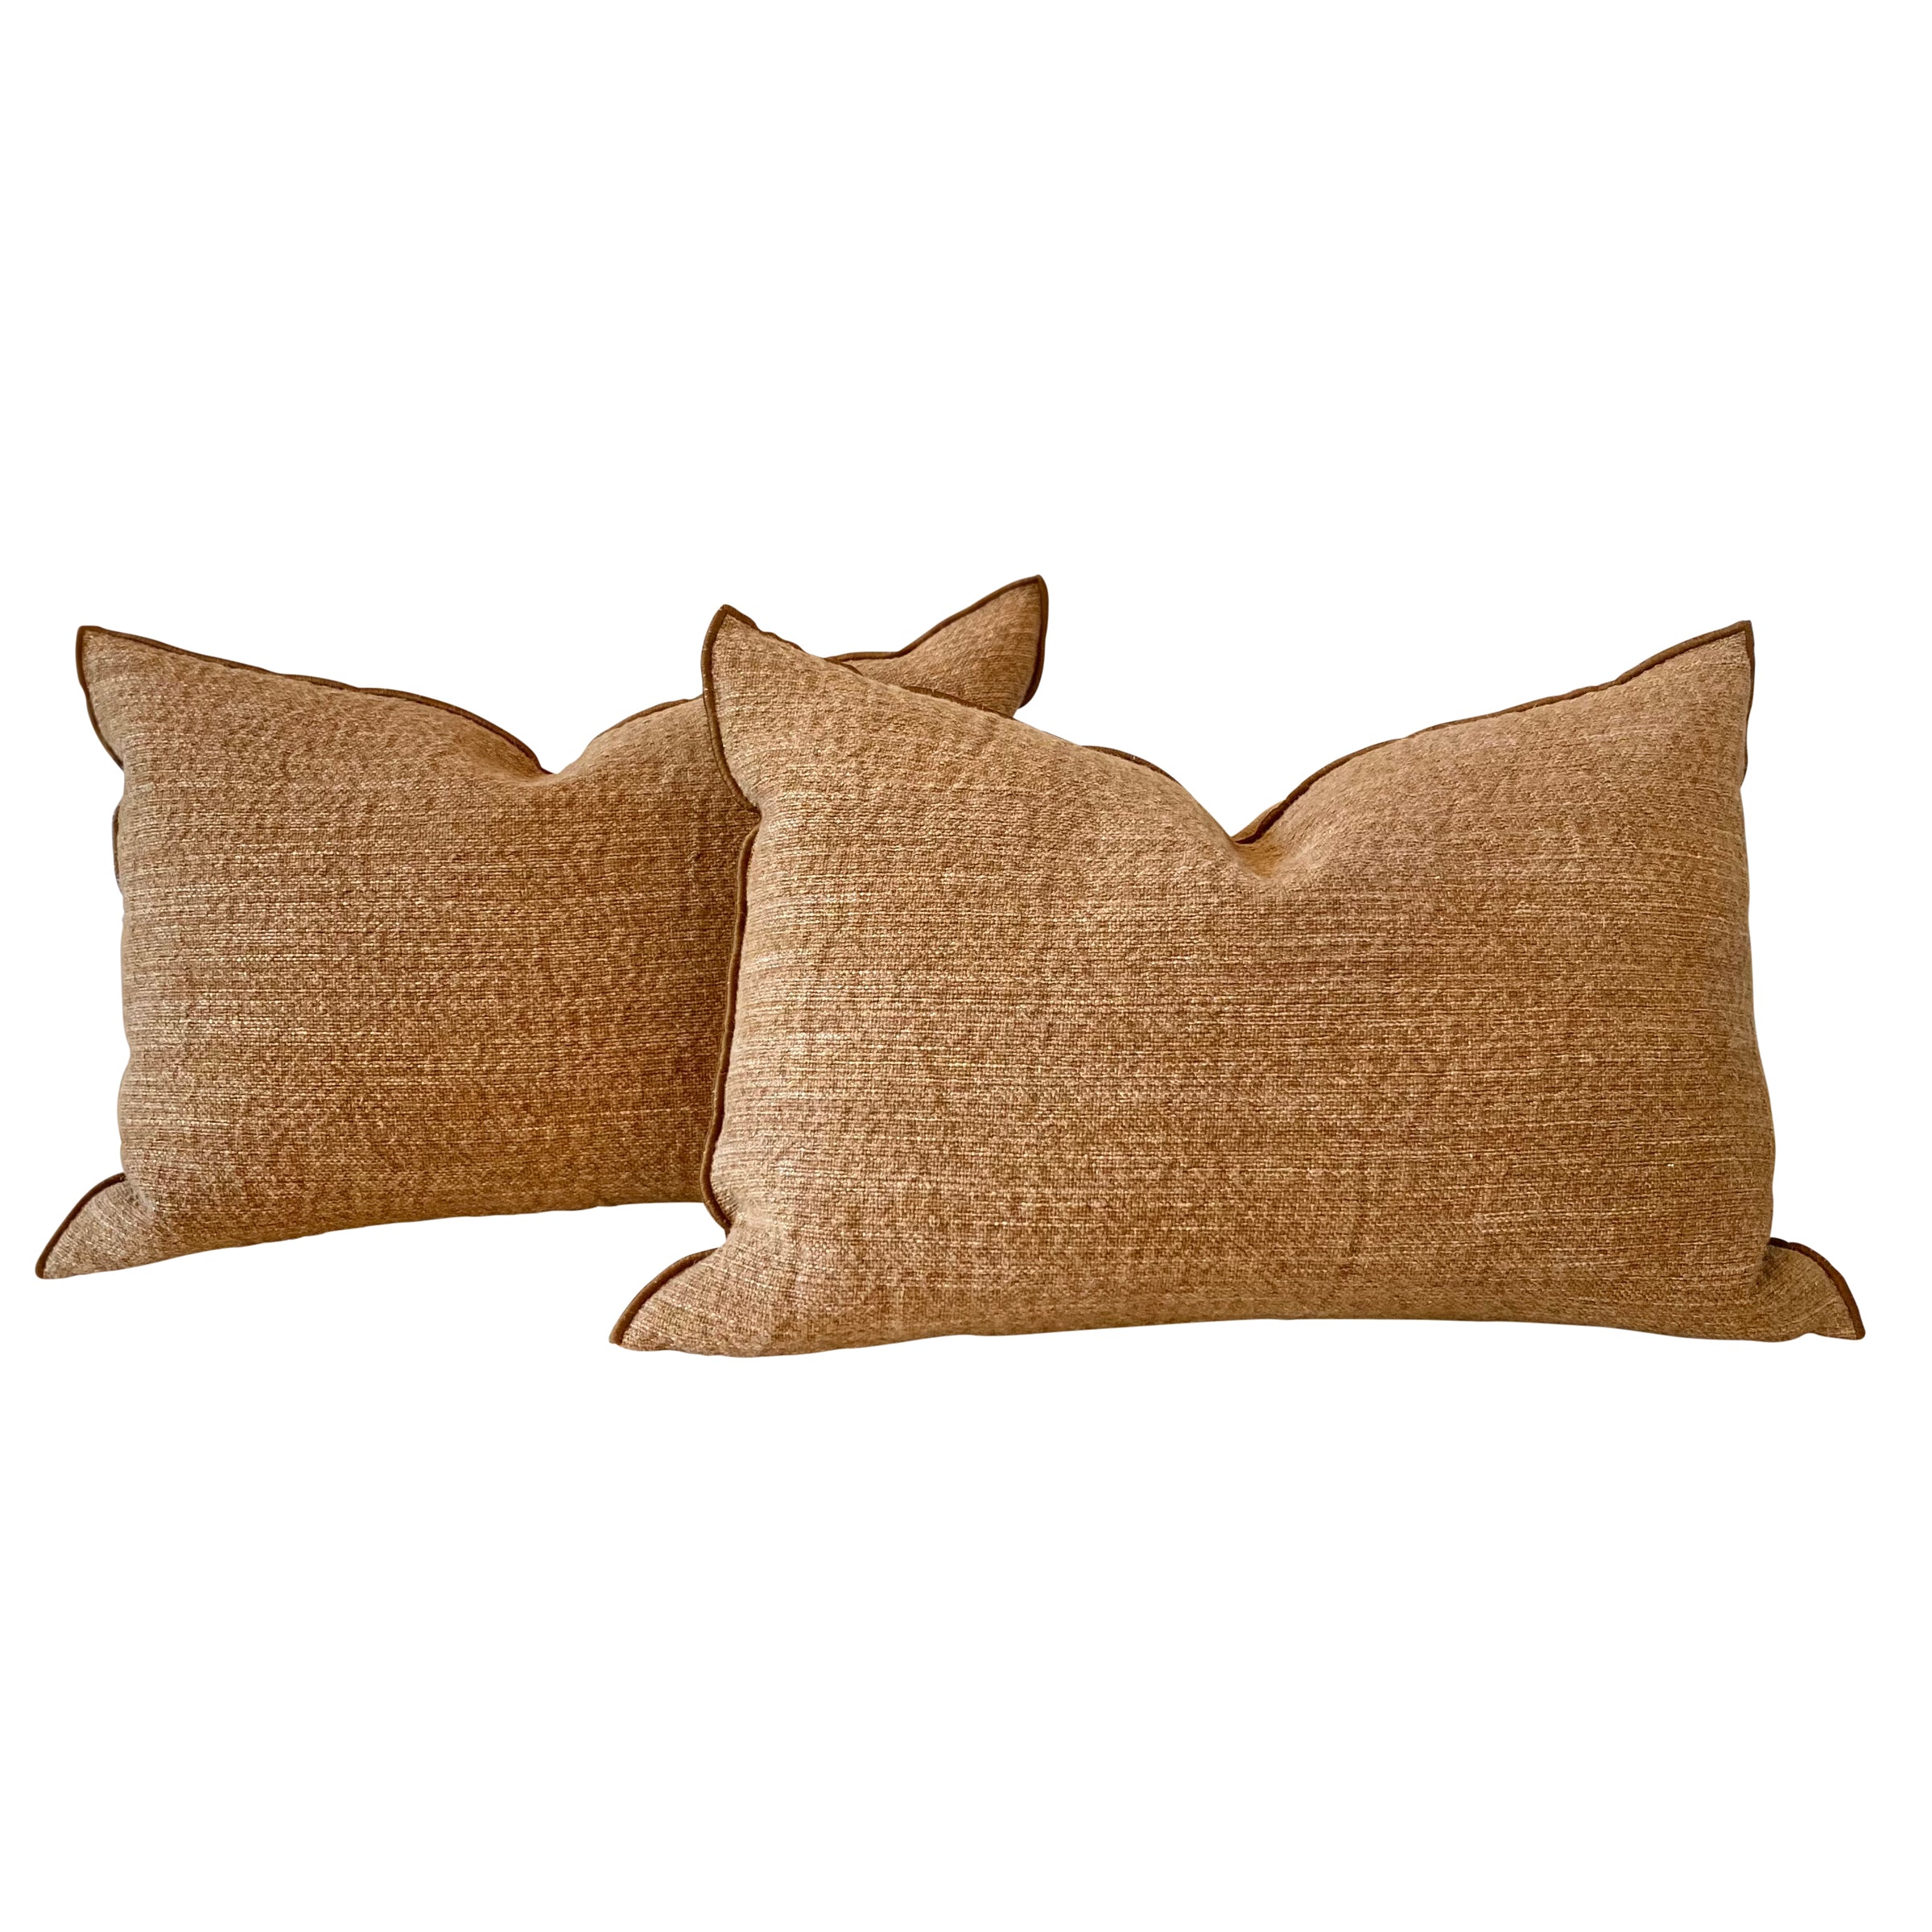 Pair of Maison Vacances 16"x24” Pillows from Clic Gallery - colletteconsignment.com